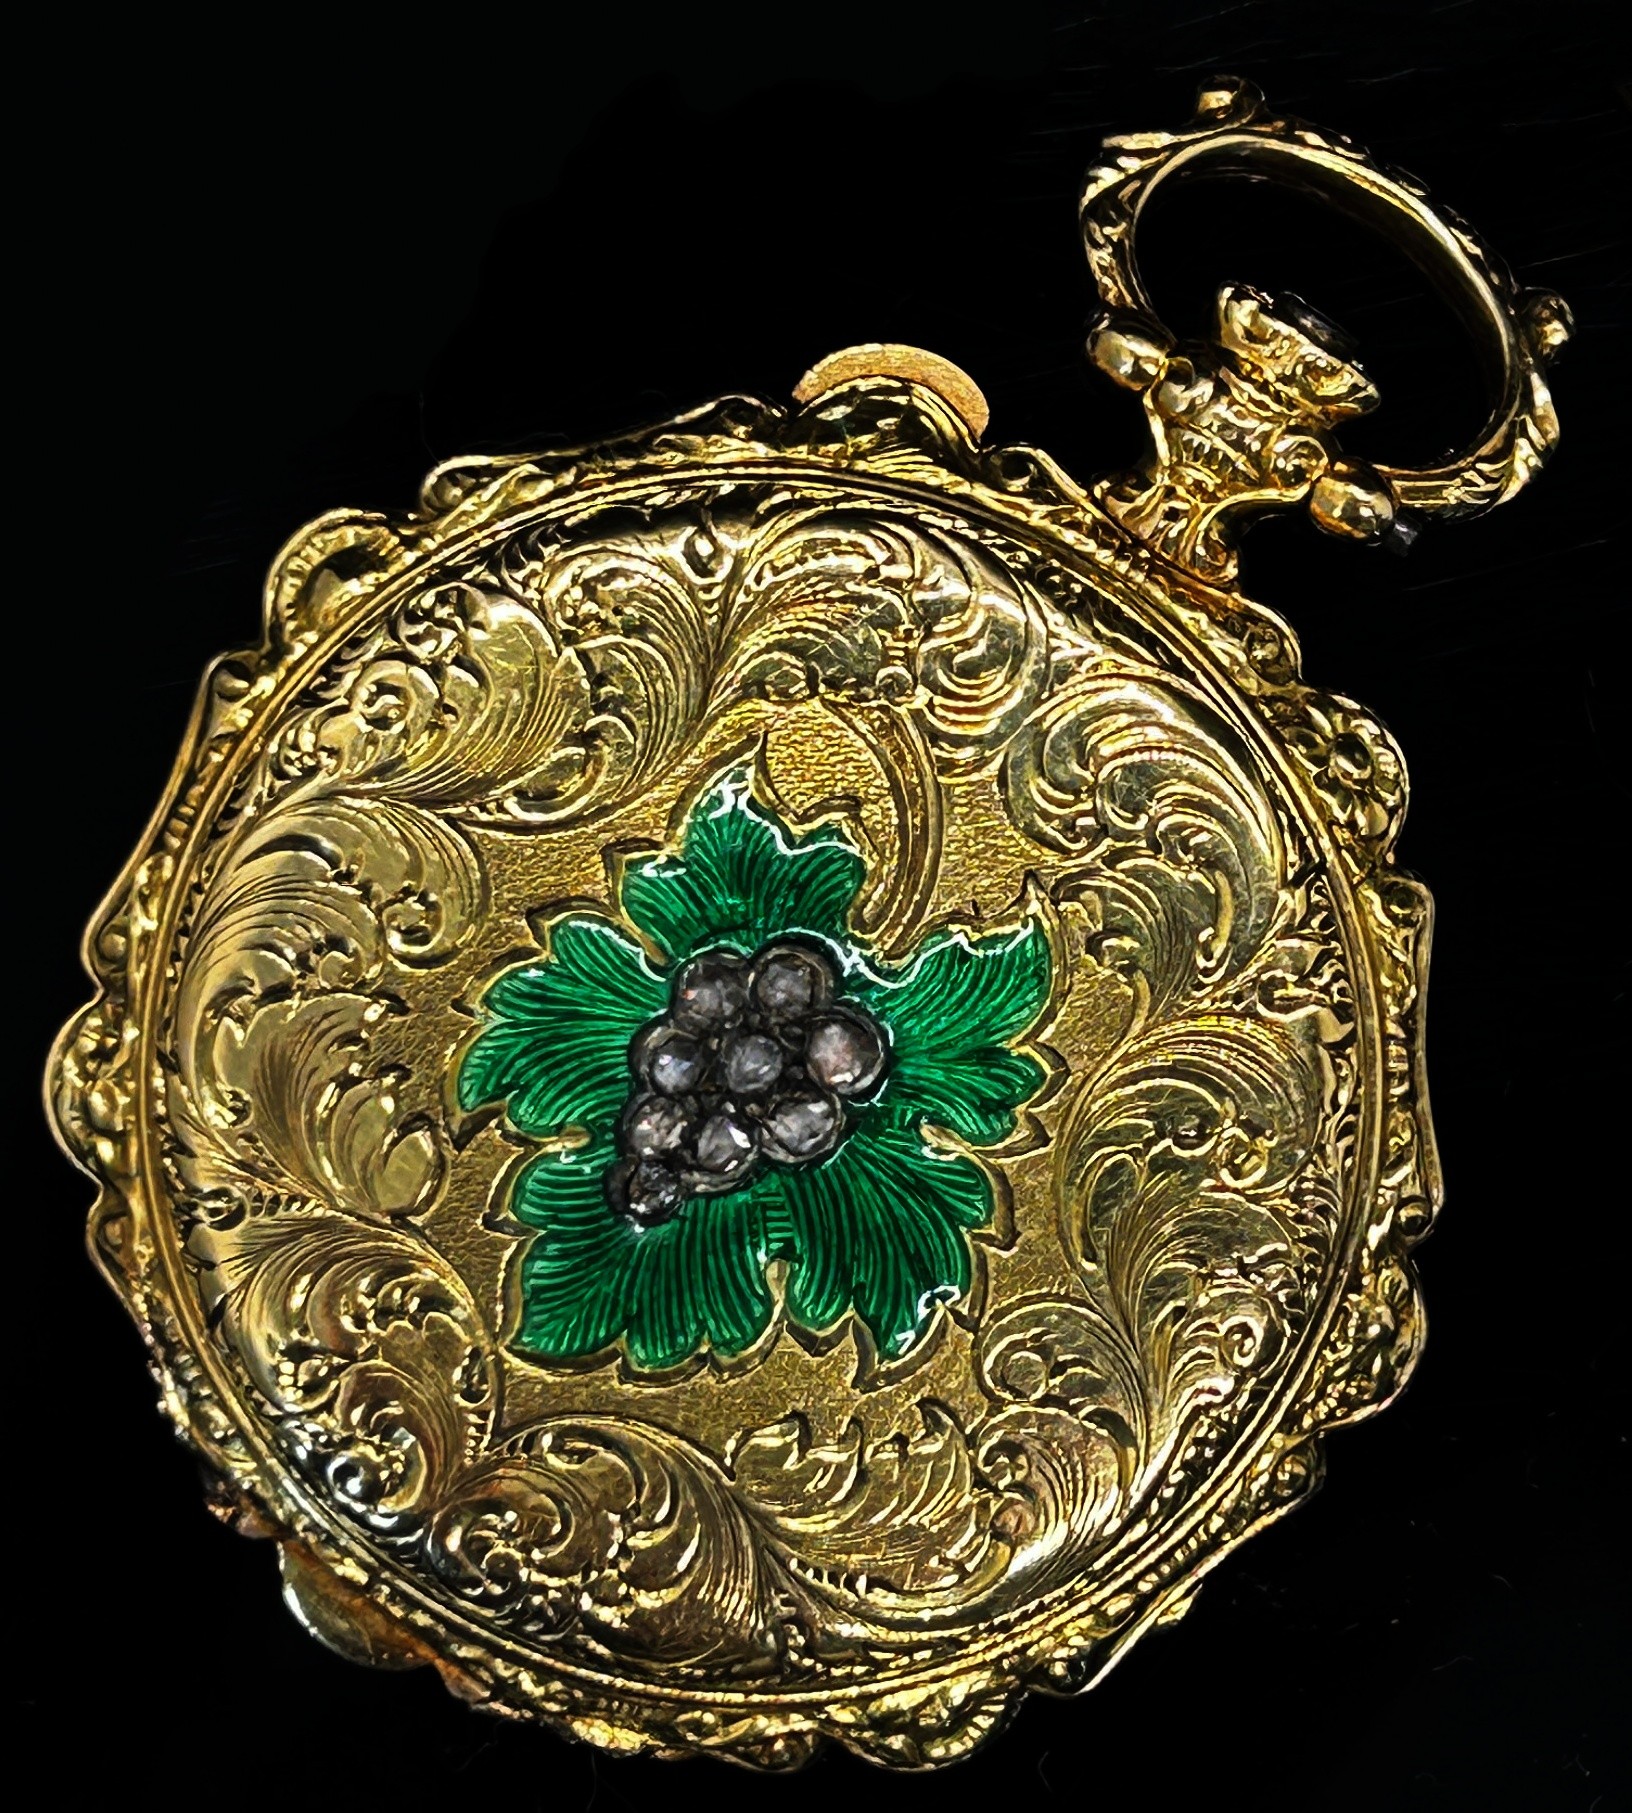 A Swiss 18ct yellow gold dress fob watch with green enamel vine detail and rose-cut diamond set - Image 3 of 4